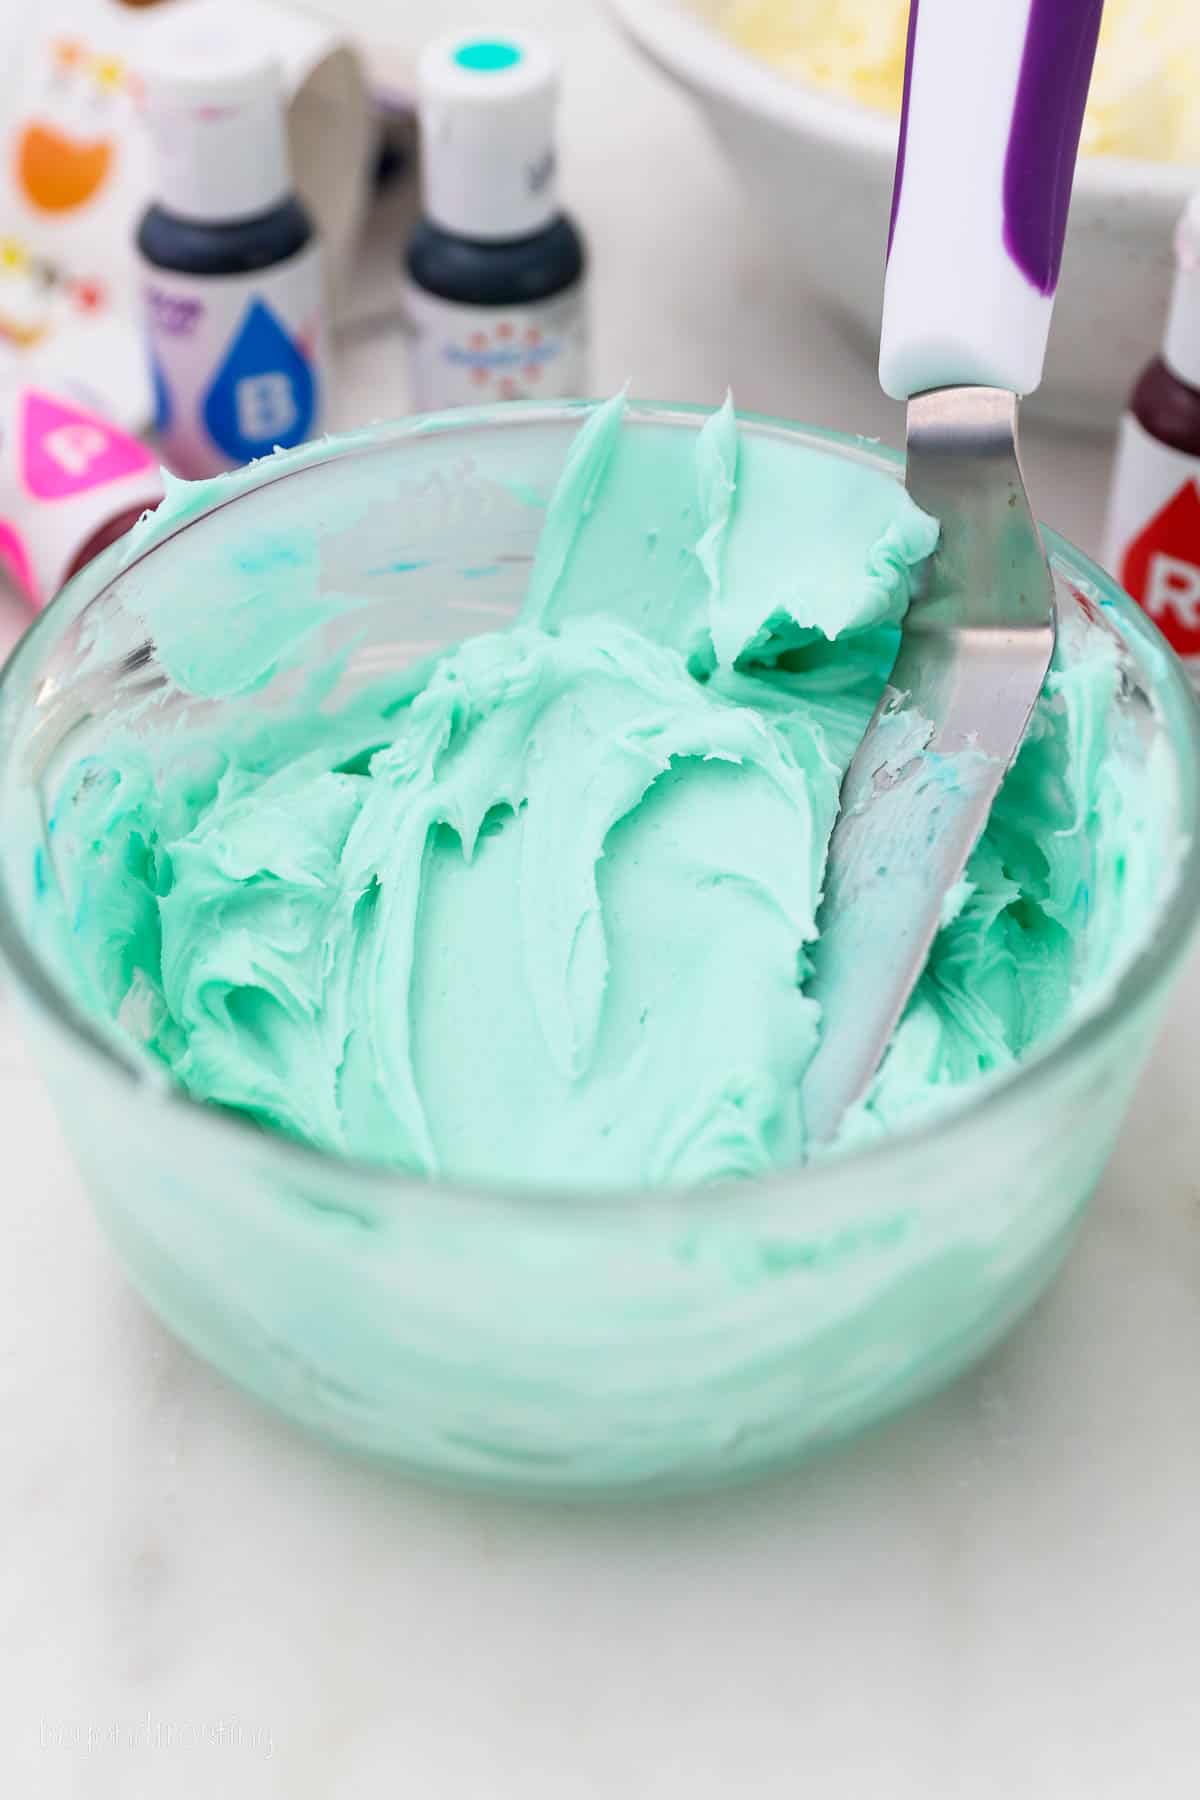 A bowl of teal colored vanilla buttercream with an offset spatula.